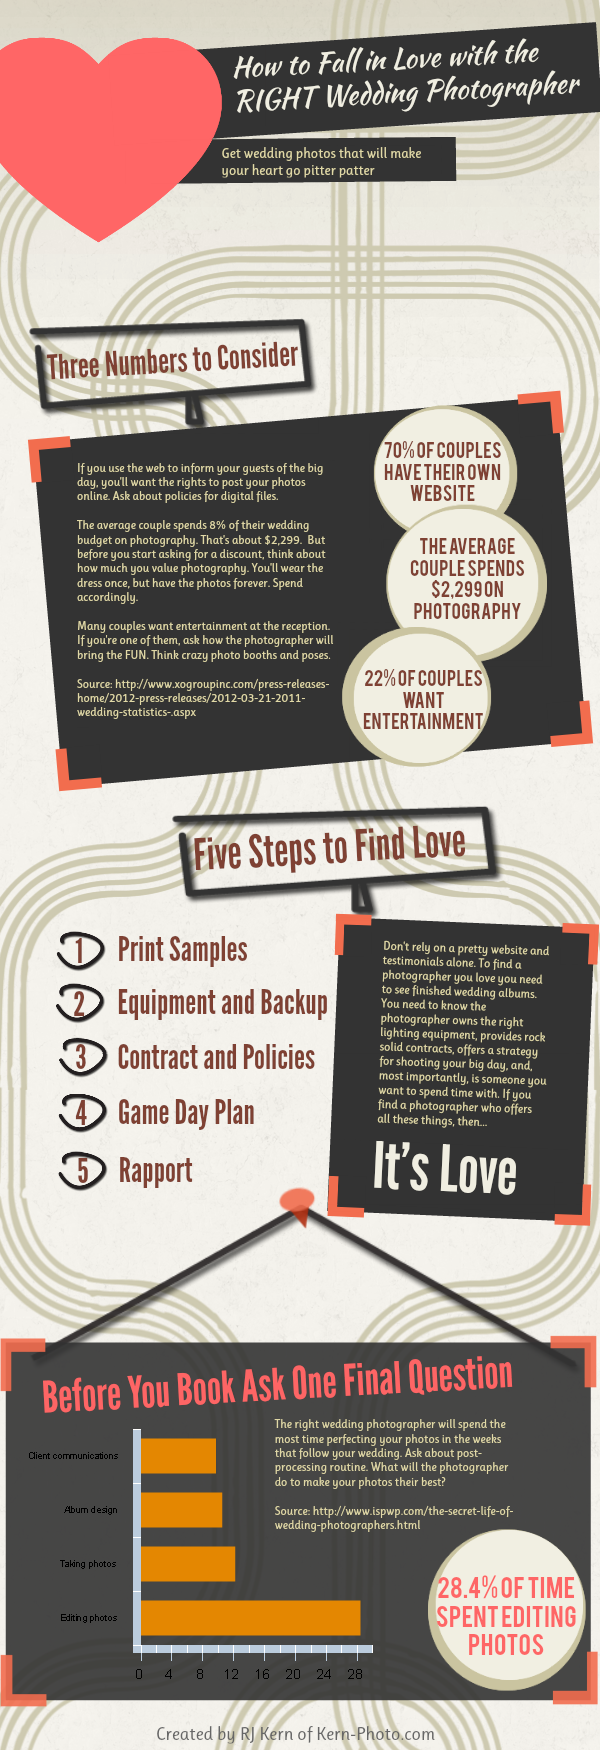 wpid-how-to-fall-in-love-right-wedding-photographer-2013-02-28-20-15.png